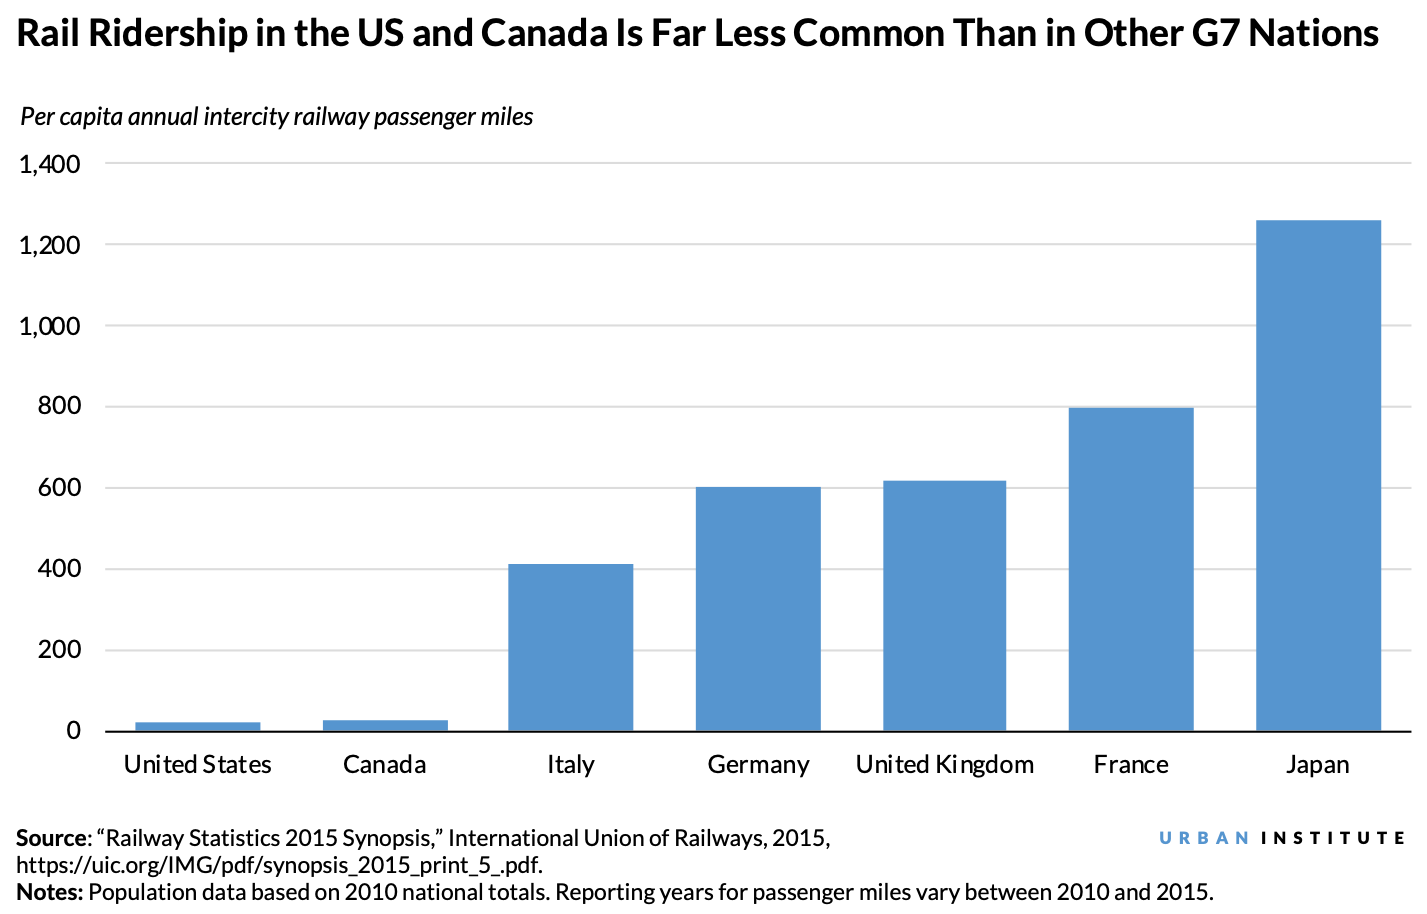 Bar chart showing rail ridership in the US and Canada is far less common than in other G7 nations